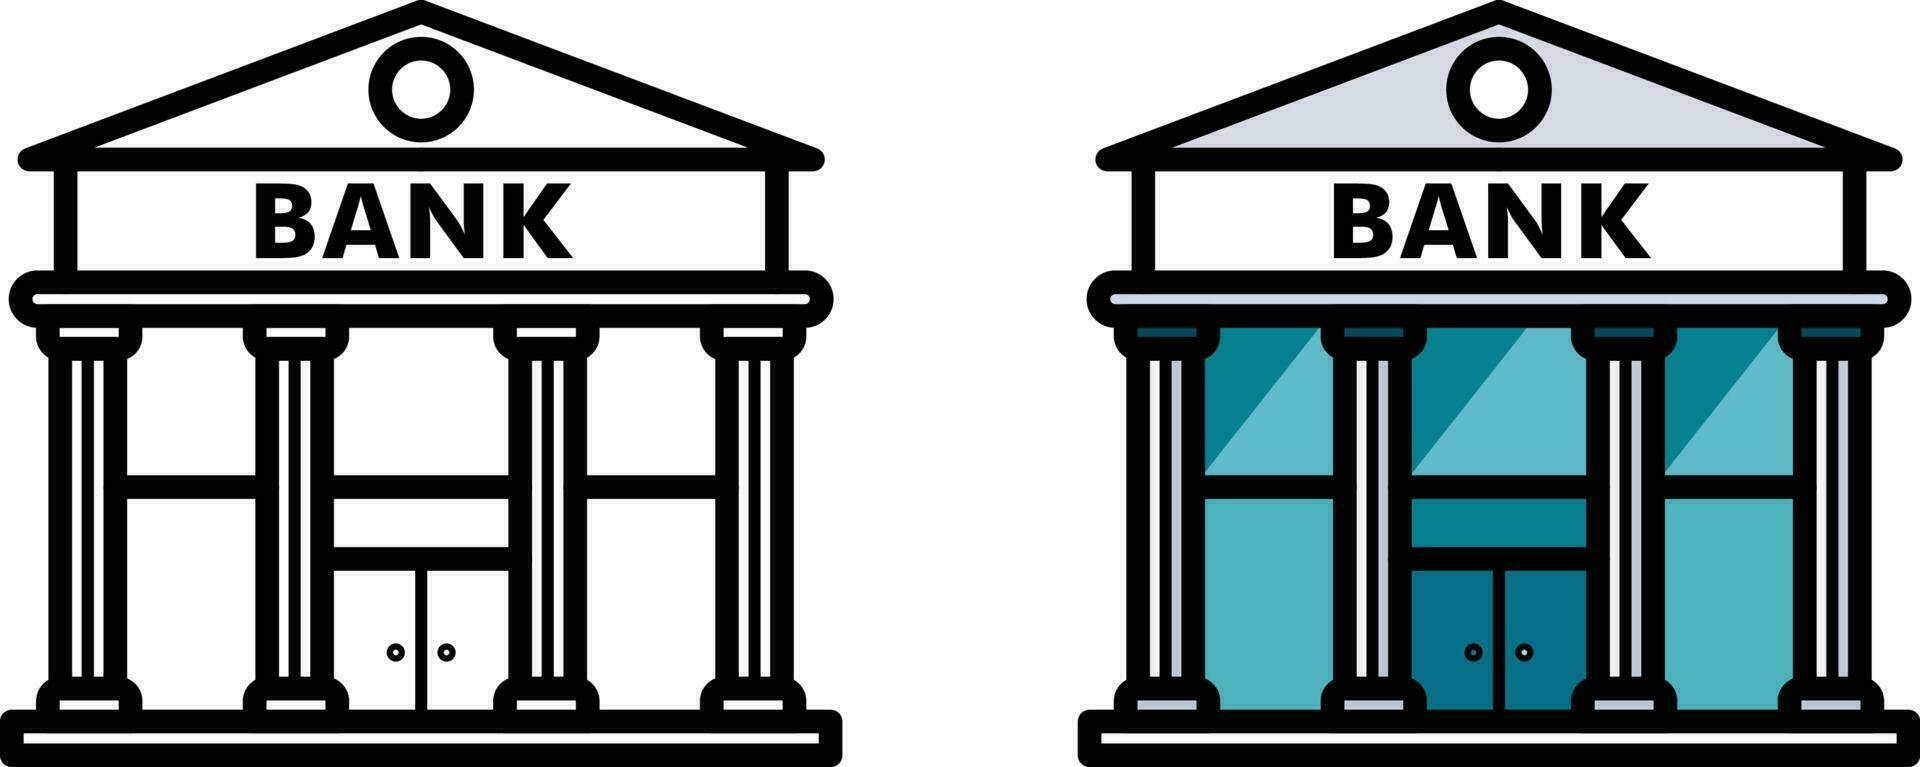 Federal reserve bank building flat style vector graphic and outlined clip art icon vector image